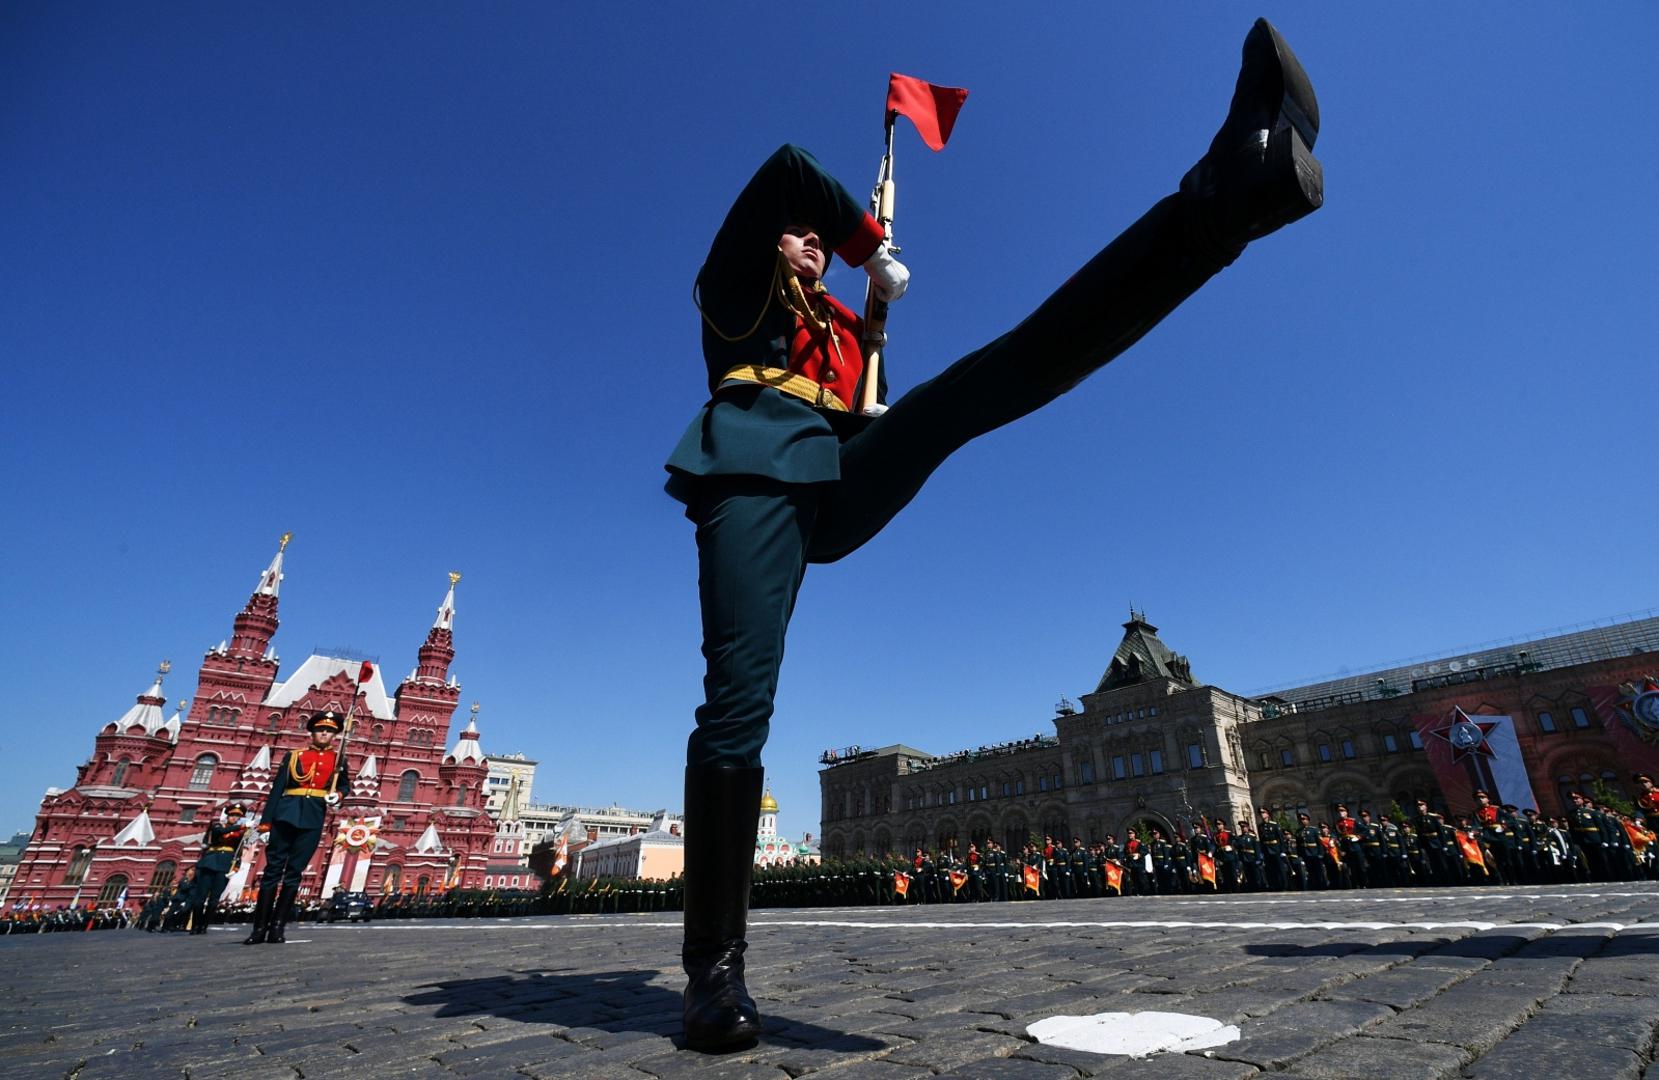 Victory Day Parade in Moscow A Russian serviceman marches during the Victory Day Parade in Red Square in Moscow, Russia, June 24, 2020. The military parade, marking the 75th anniversary of the victory over Nazi Germany in World War Two, was scheduled for May 9 but postponed due to the outbreak of the coronavirus disease (COVID-19). Host photo agency/Ramil Sitdikov via REUTERS Host photo agency